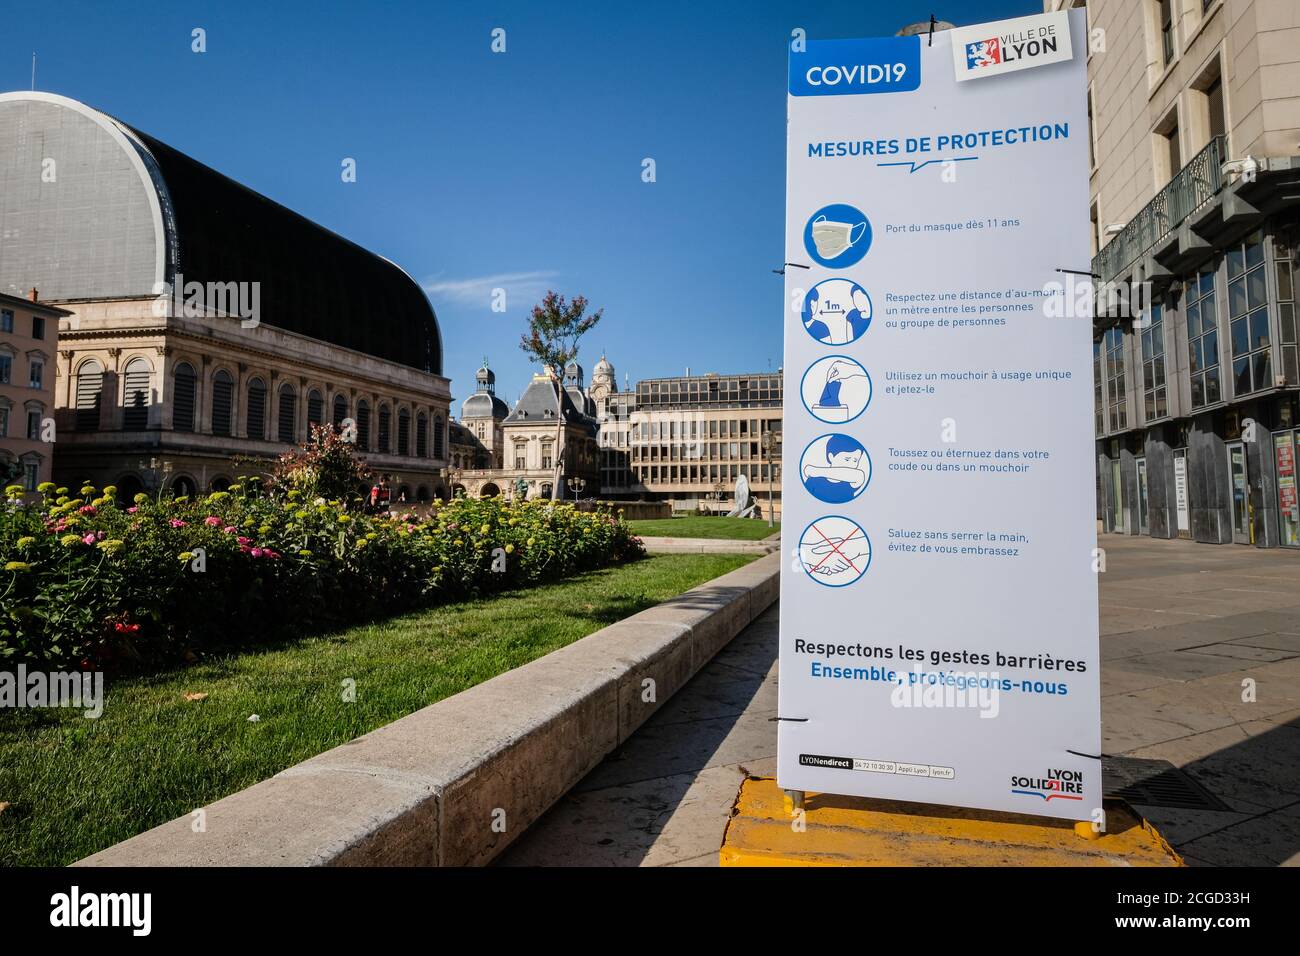 On 10/09/2020, Lyon, Auvergne-Rhône-Alpes, France. Information panel against covid19 in the streets of the city of Lyon Stock Photo